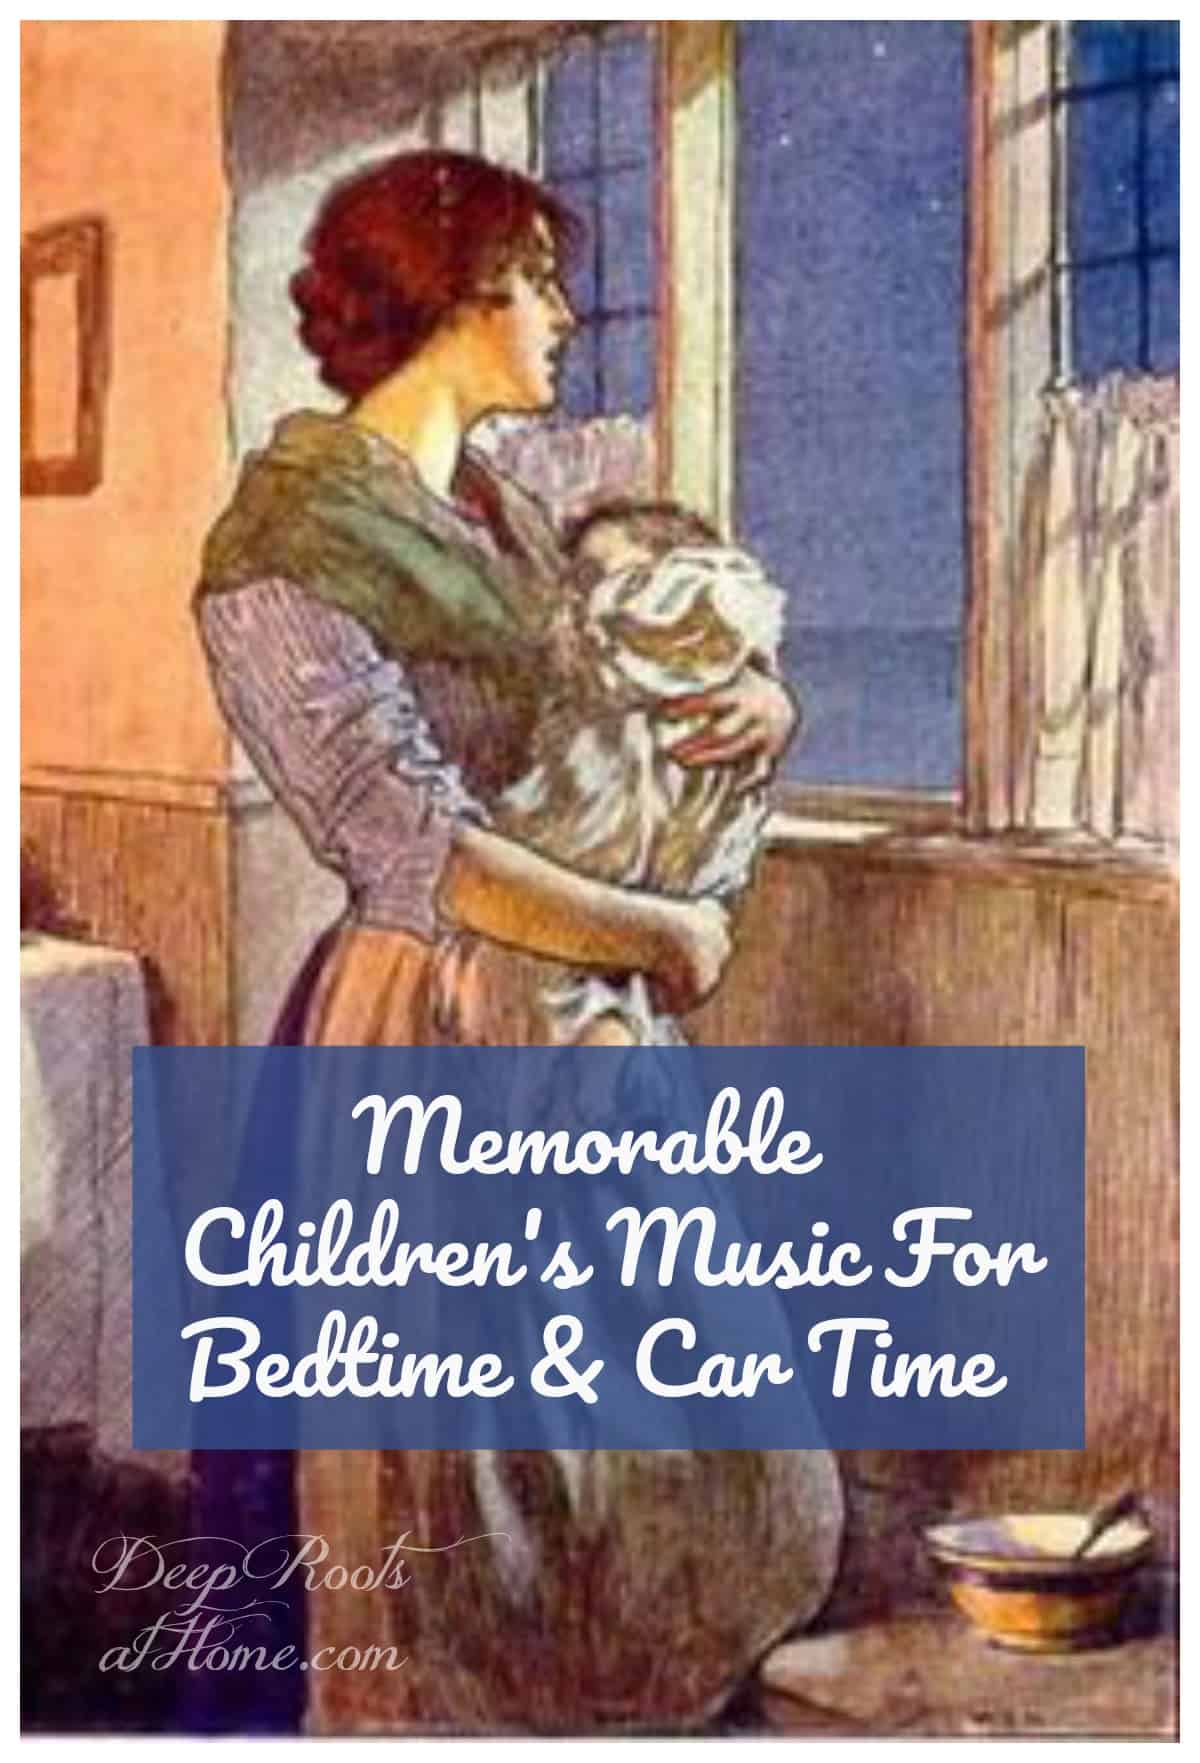 Memorable Children's Music For Car Trips & Bedtime. Jessie Willcox Smith painting